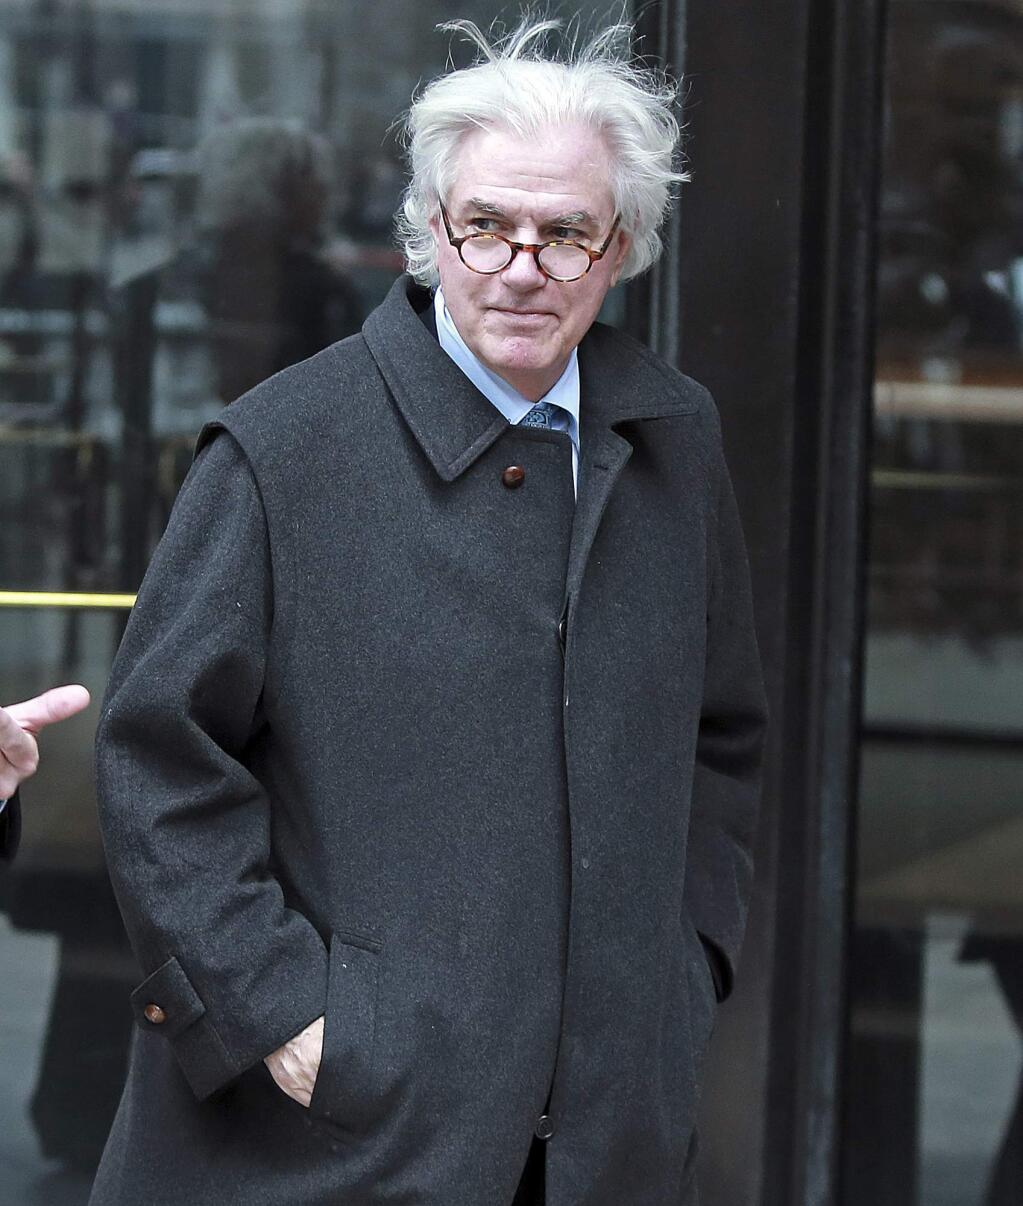 Gregory Abbott, the founder and chairman of International Dispensing Corp. leaves the federal courthouse after a hearing associated with the college admissions bribery scandal, Friday, March 29, 2019 in Boston. (Matt Stone/The Boston Herald via AP)